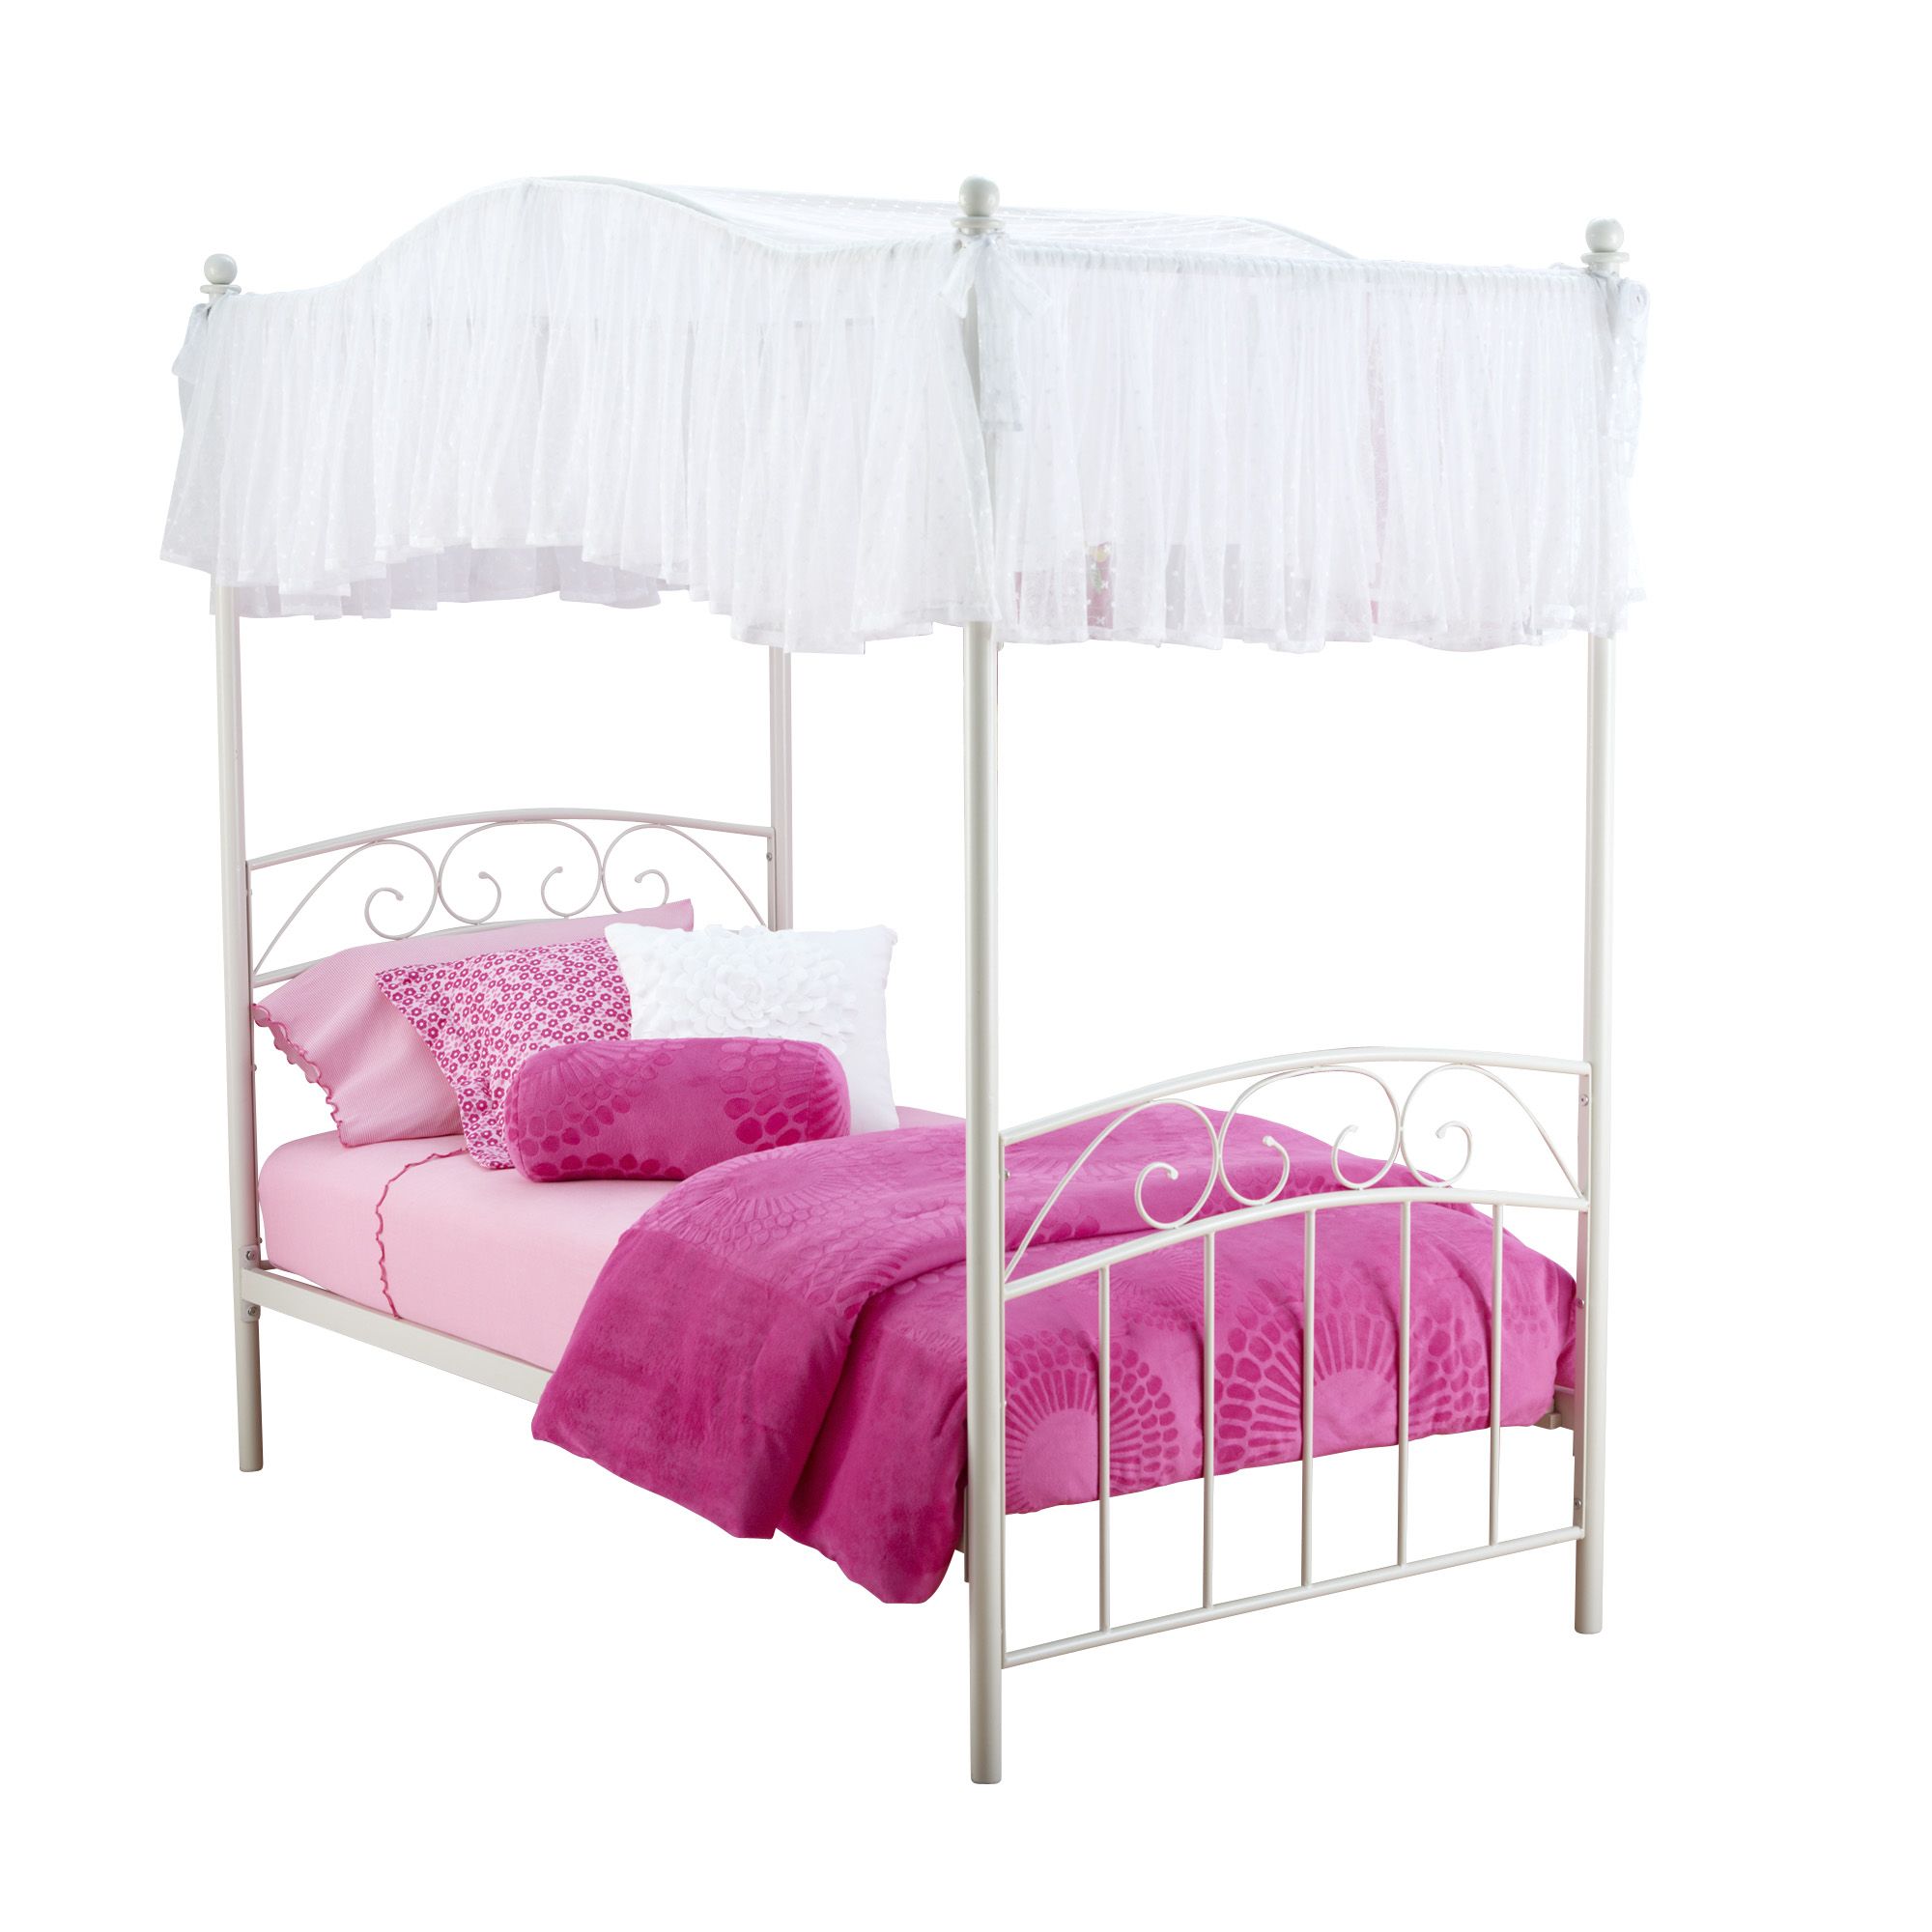 Alcove Twin White 4 Poster Bed With Canopy, White Four Poster Twin Bed